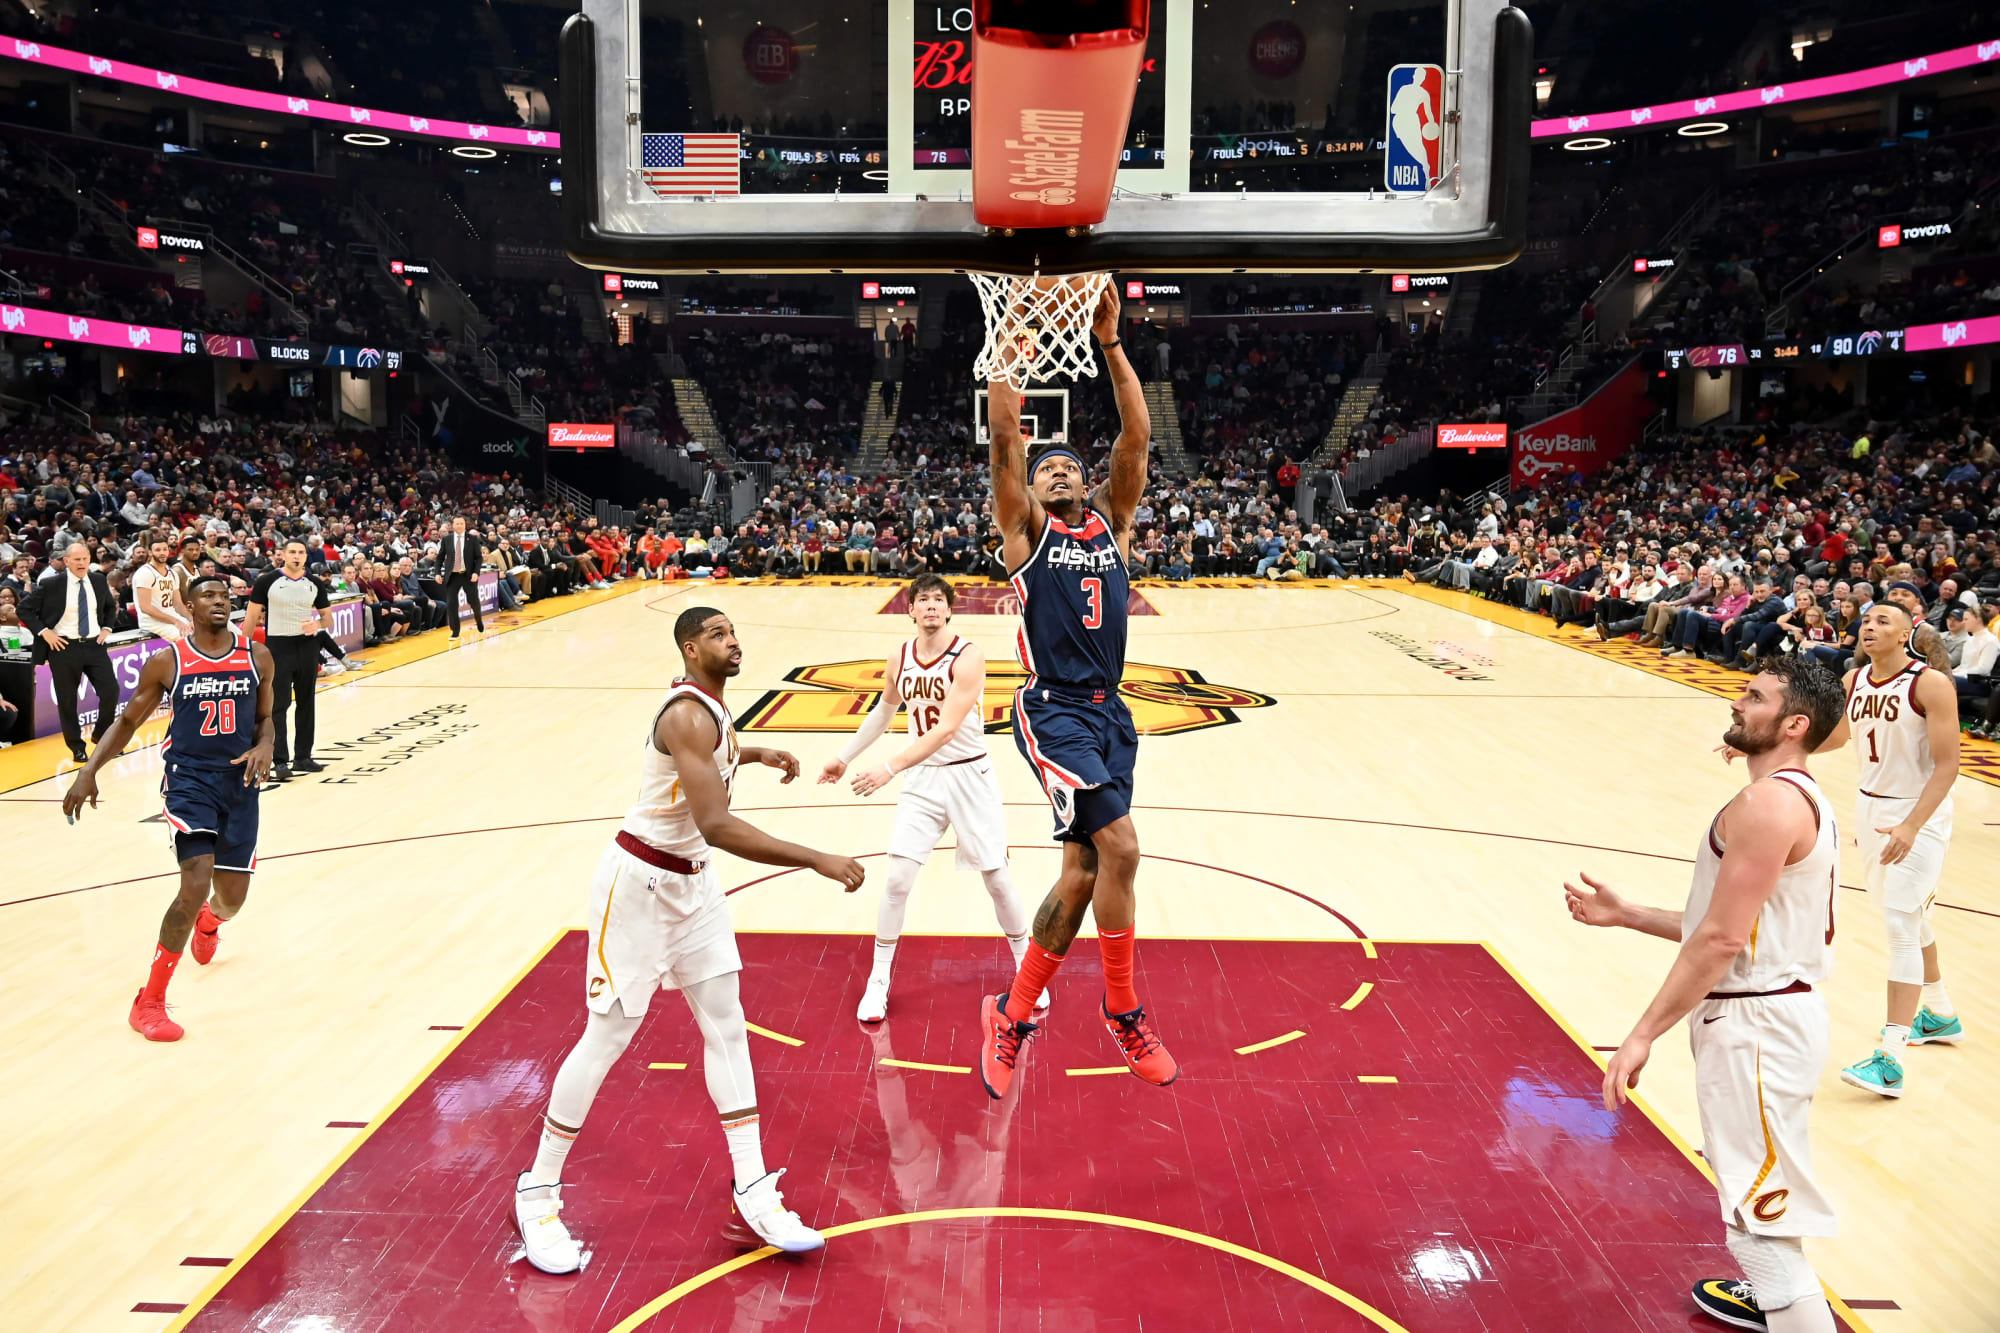 Cleveland Cavaliers: Interior D will likely look even worse post-trade